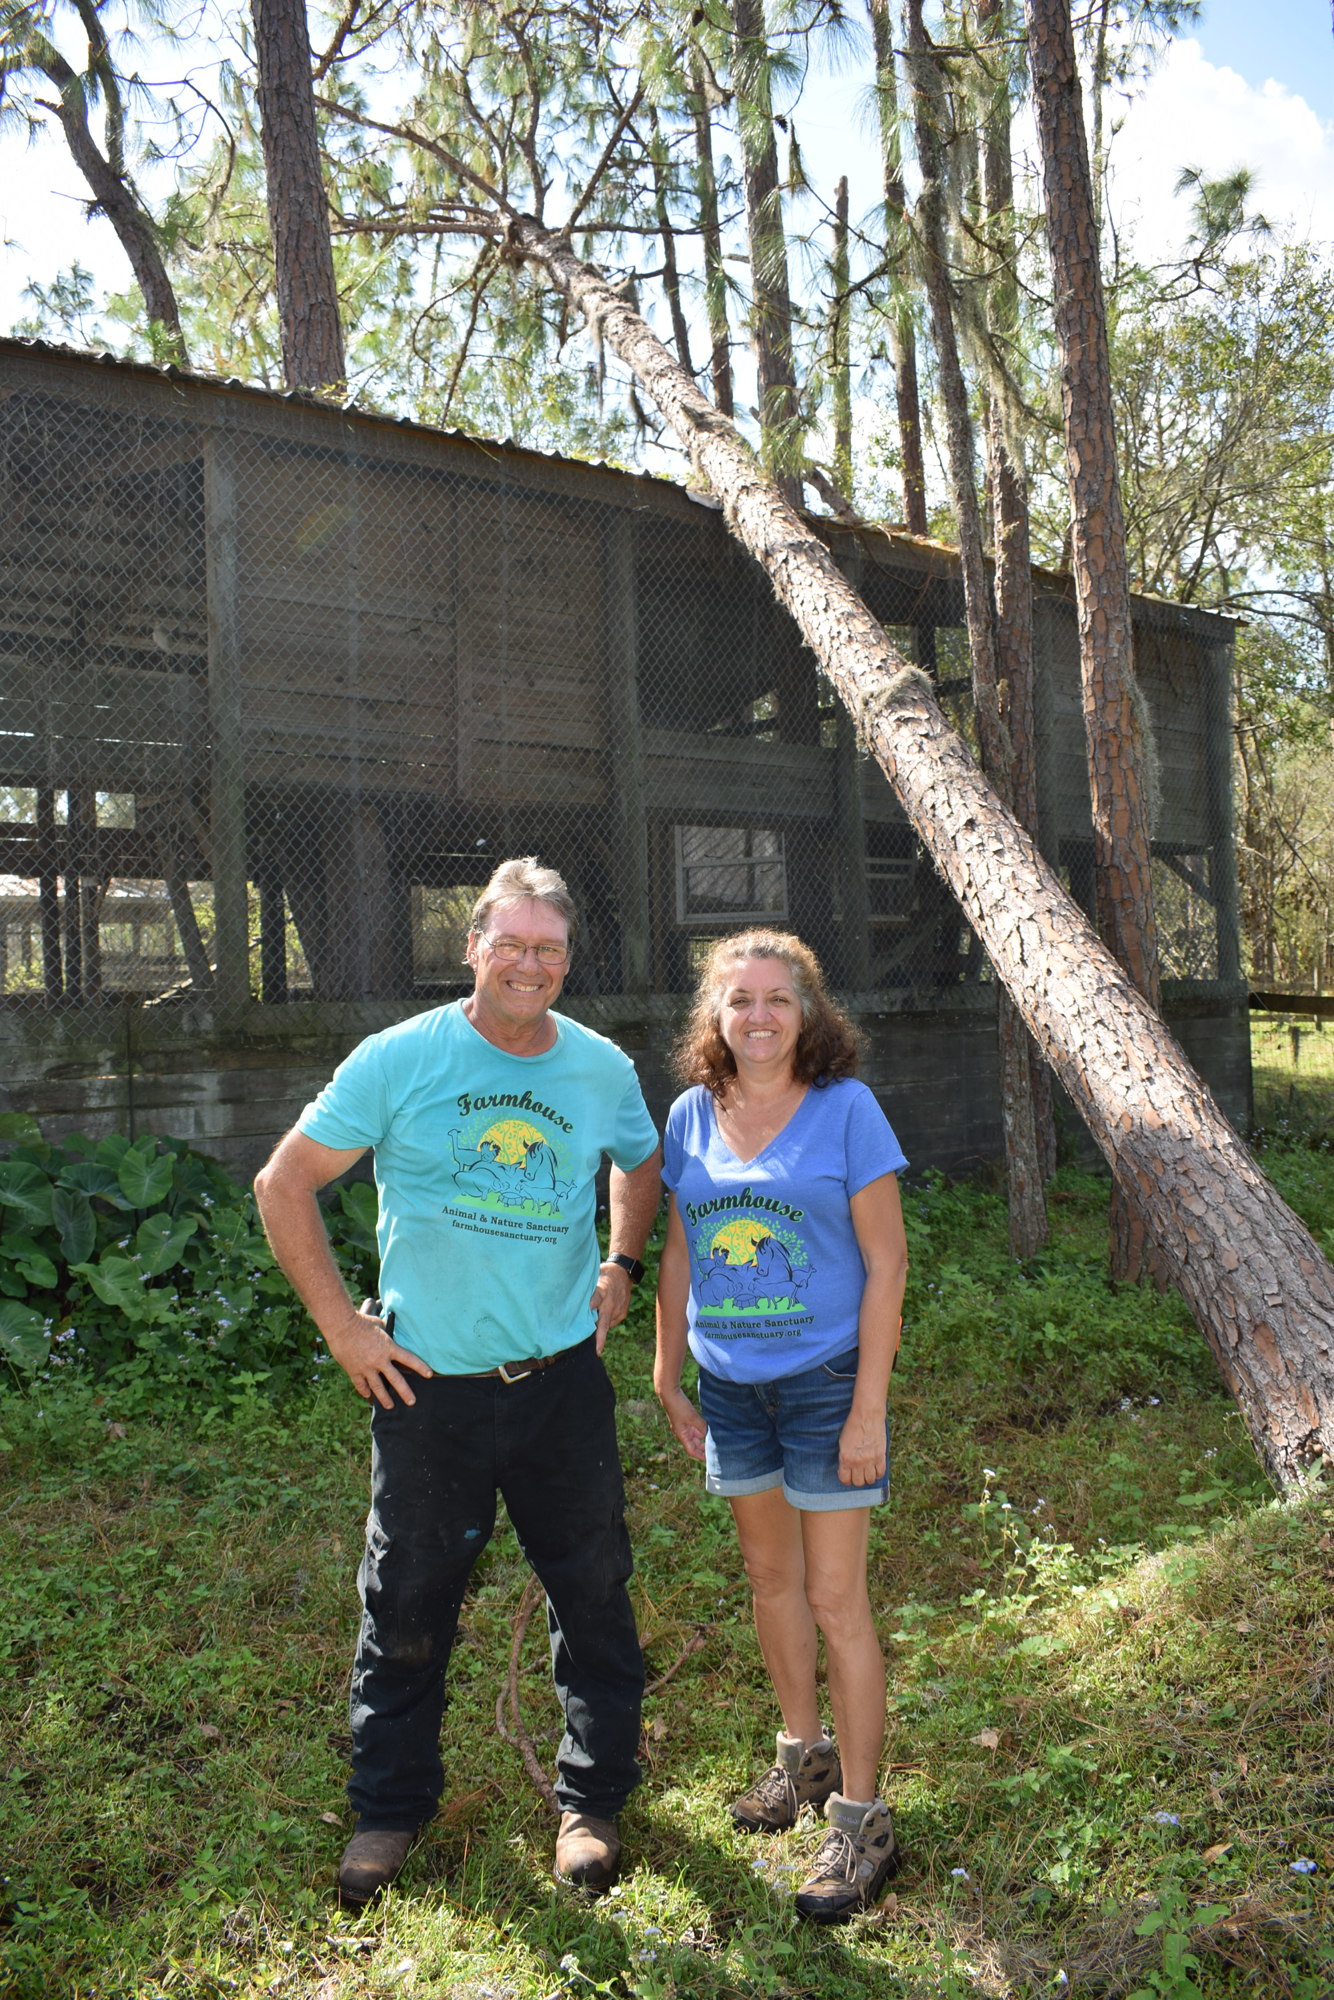 Dave and Lisa Burns continue to smile despite more than $60,000 worth of damage at Farmhouse Animal and Nature Sanctuary. Photo by Jay Heater